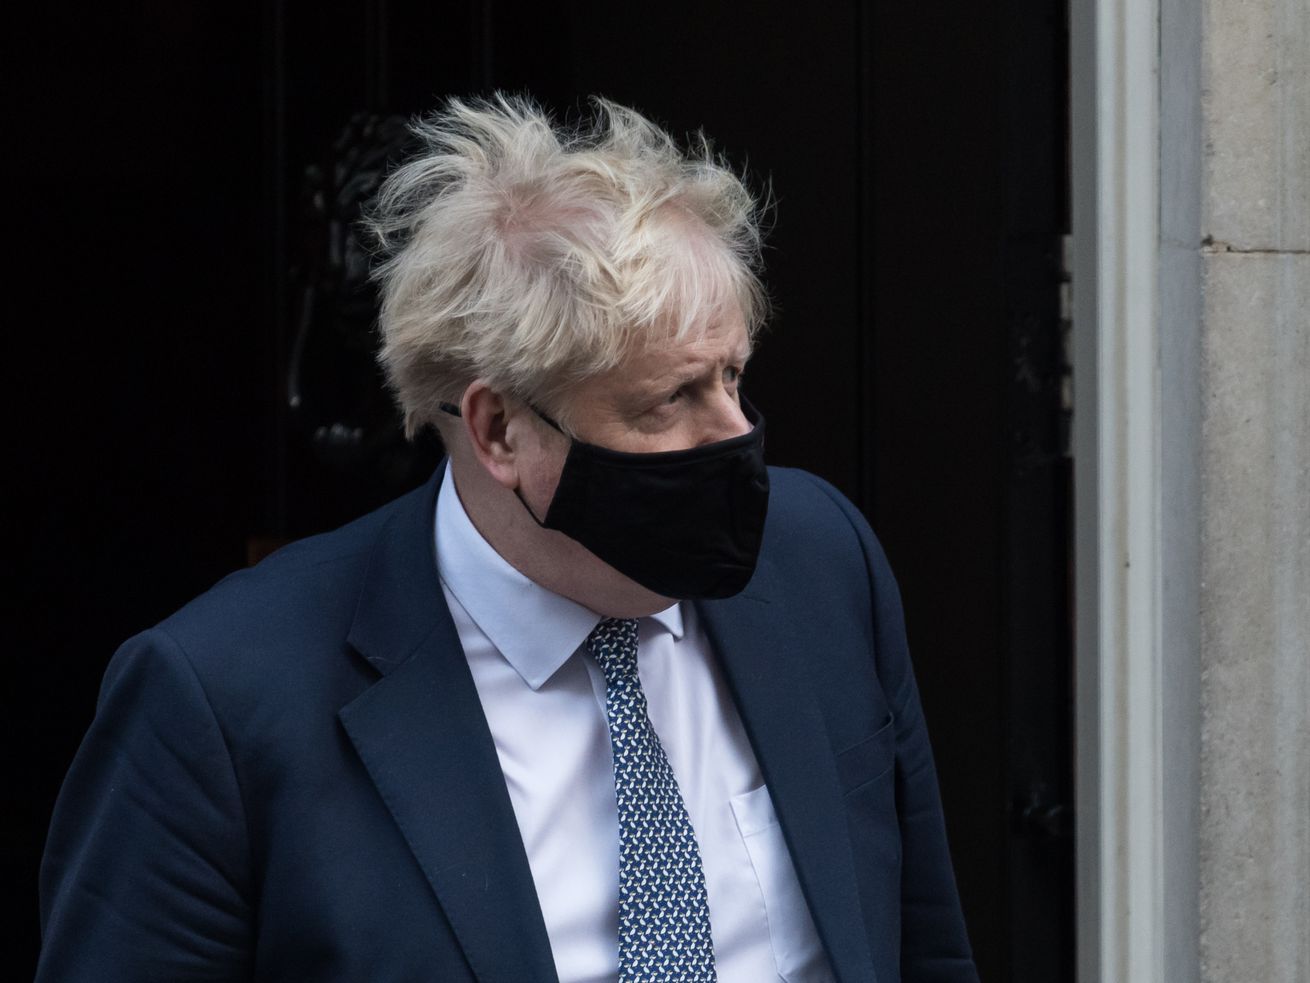 Even Tories are over Boris Johnson’s scandals after “Partygate”